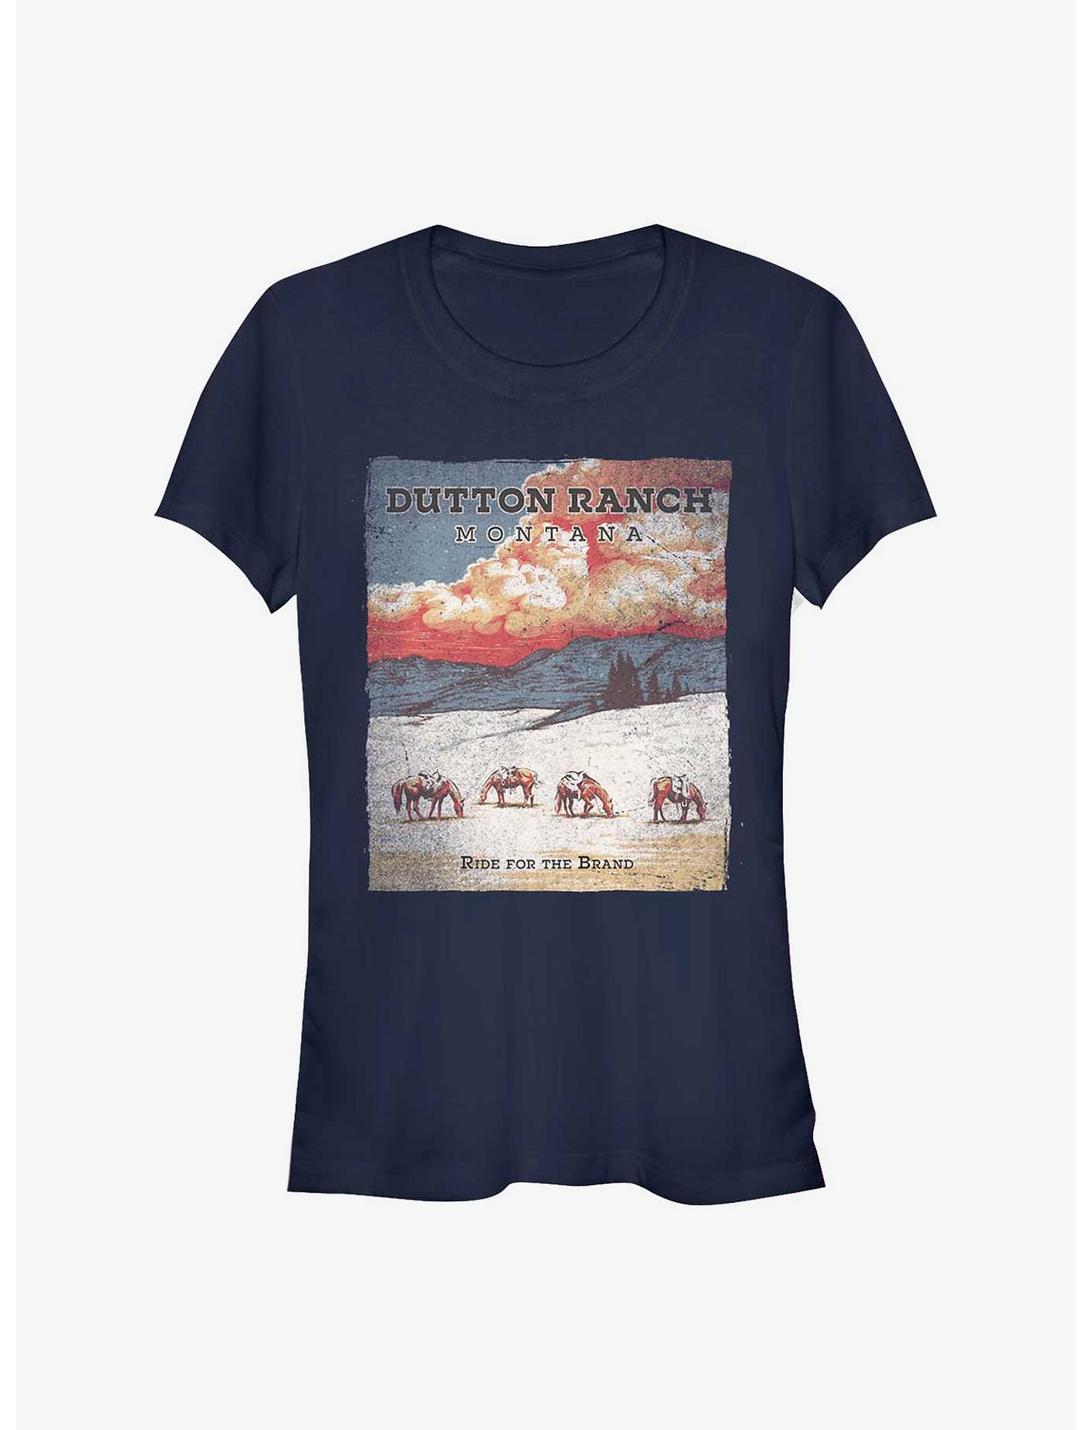 Yellowstone Ride For The Brand Poster Girls T-Shirt, NAVY, hi-res